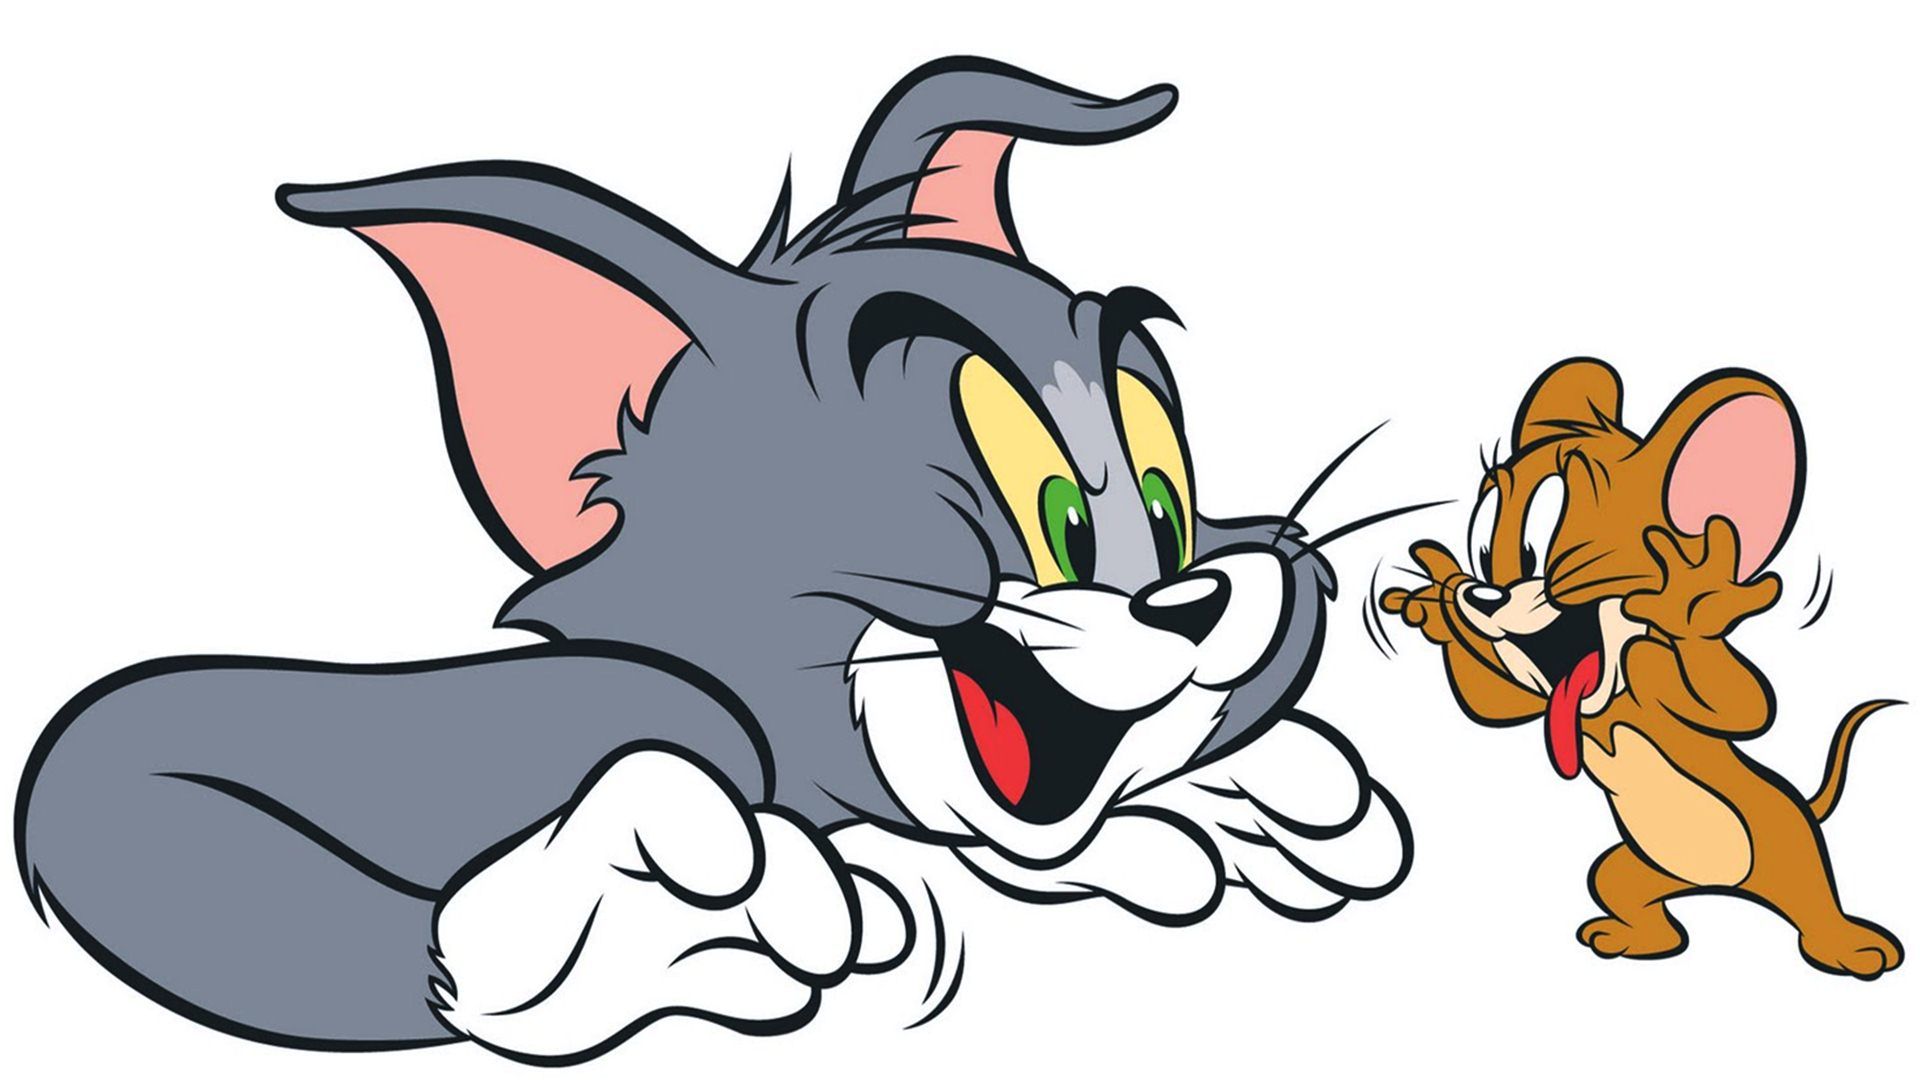 Tom And Jerry Funny Wallpapers